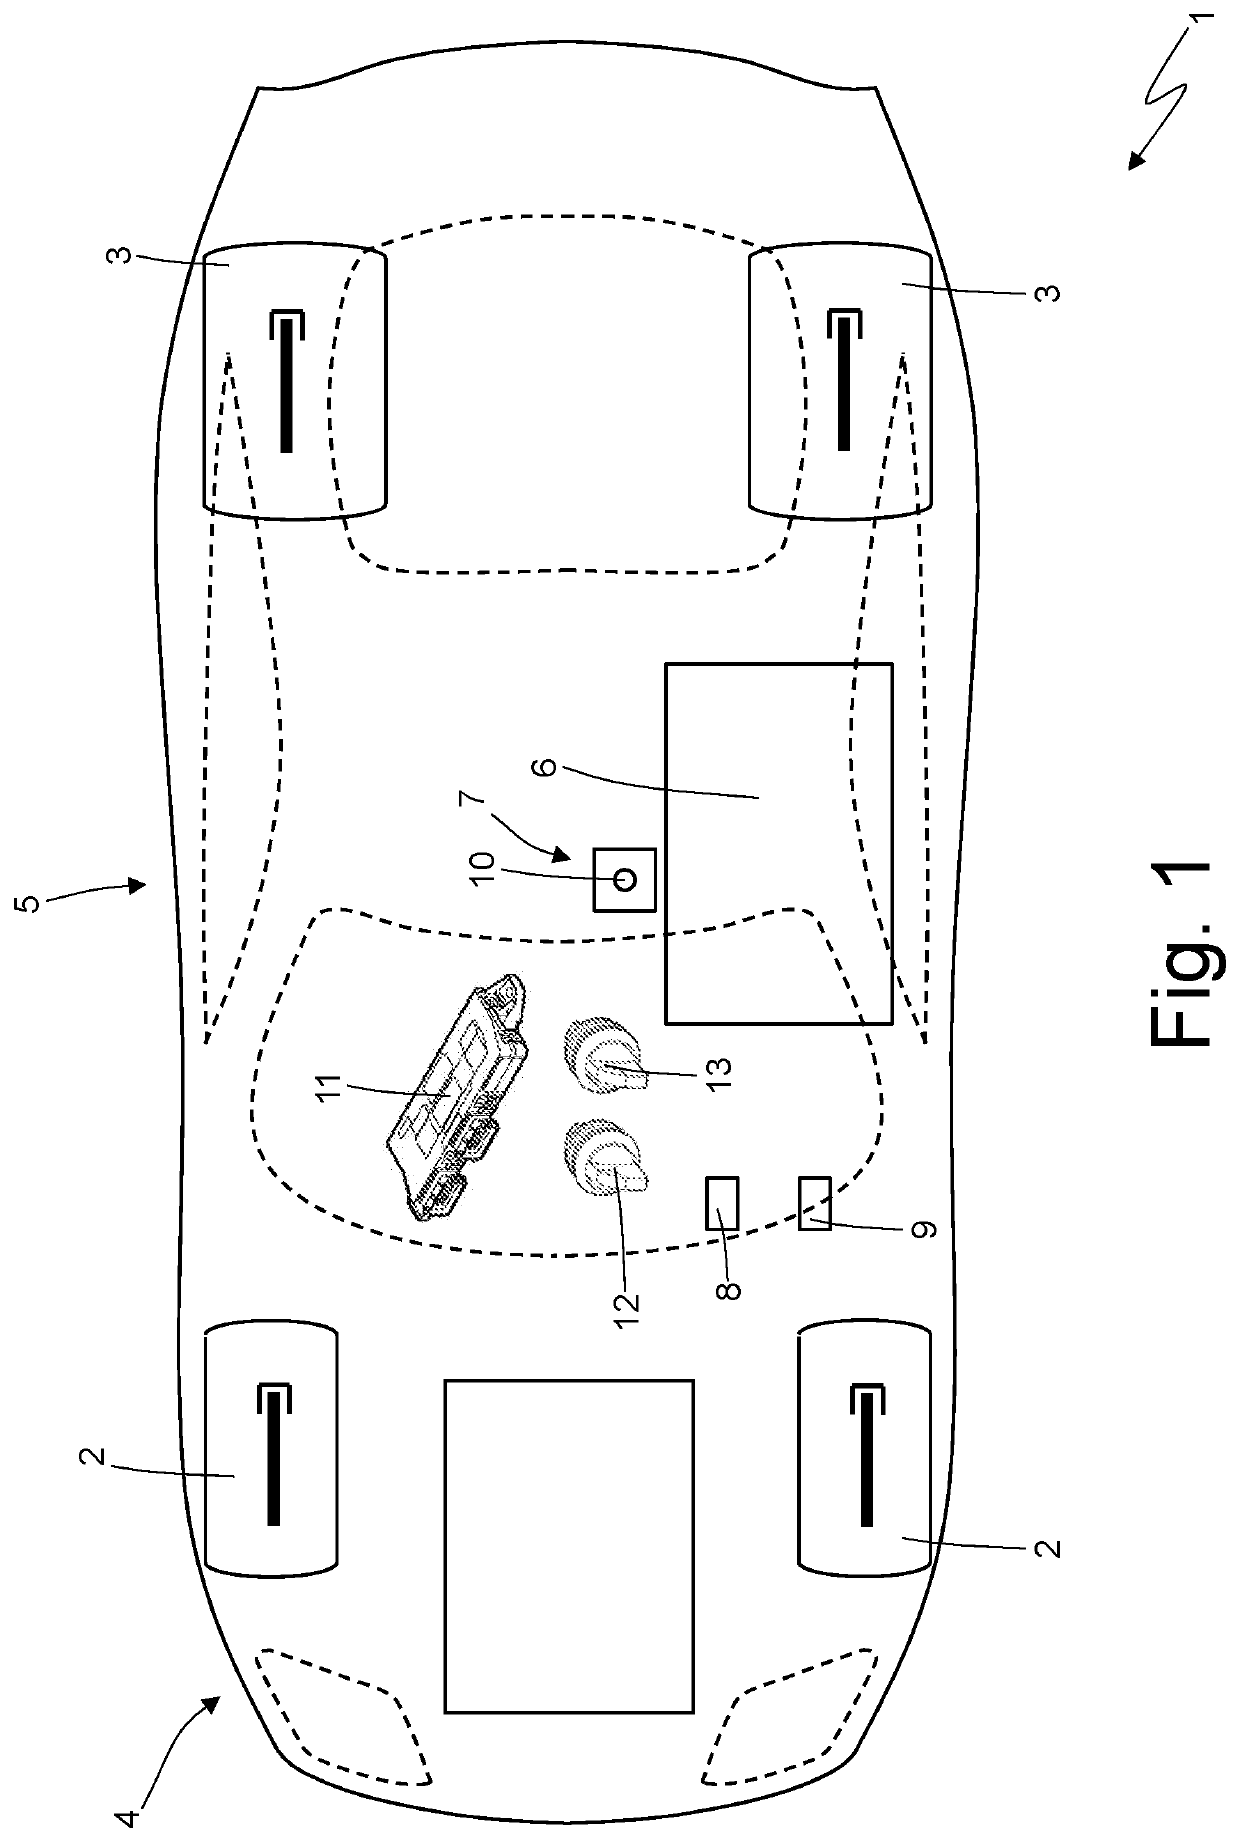 Car control method and system